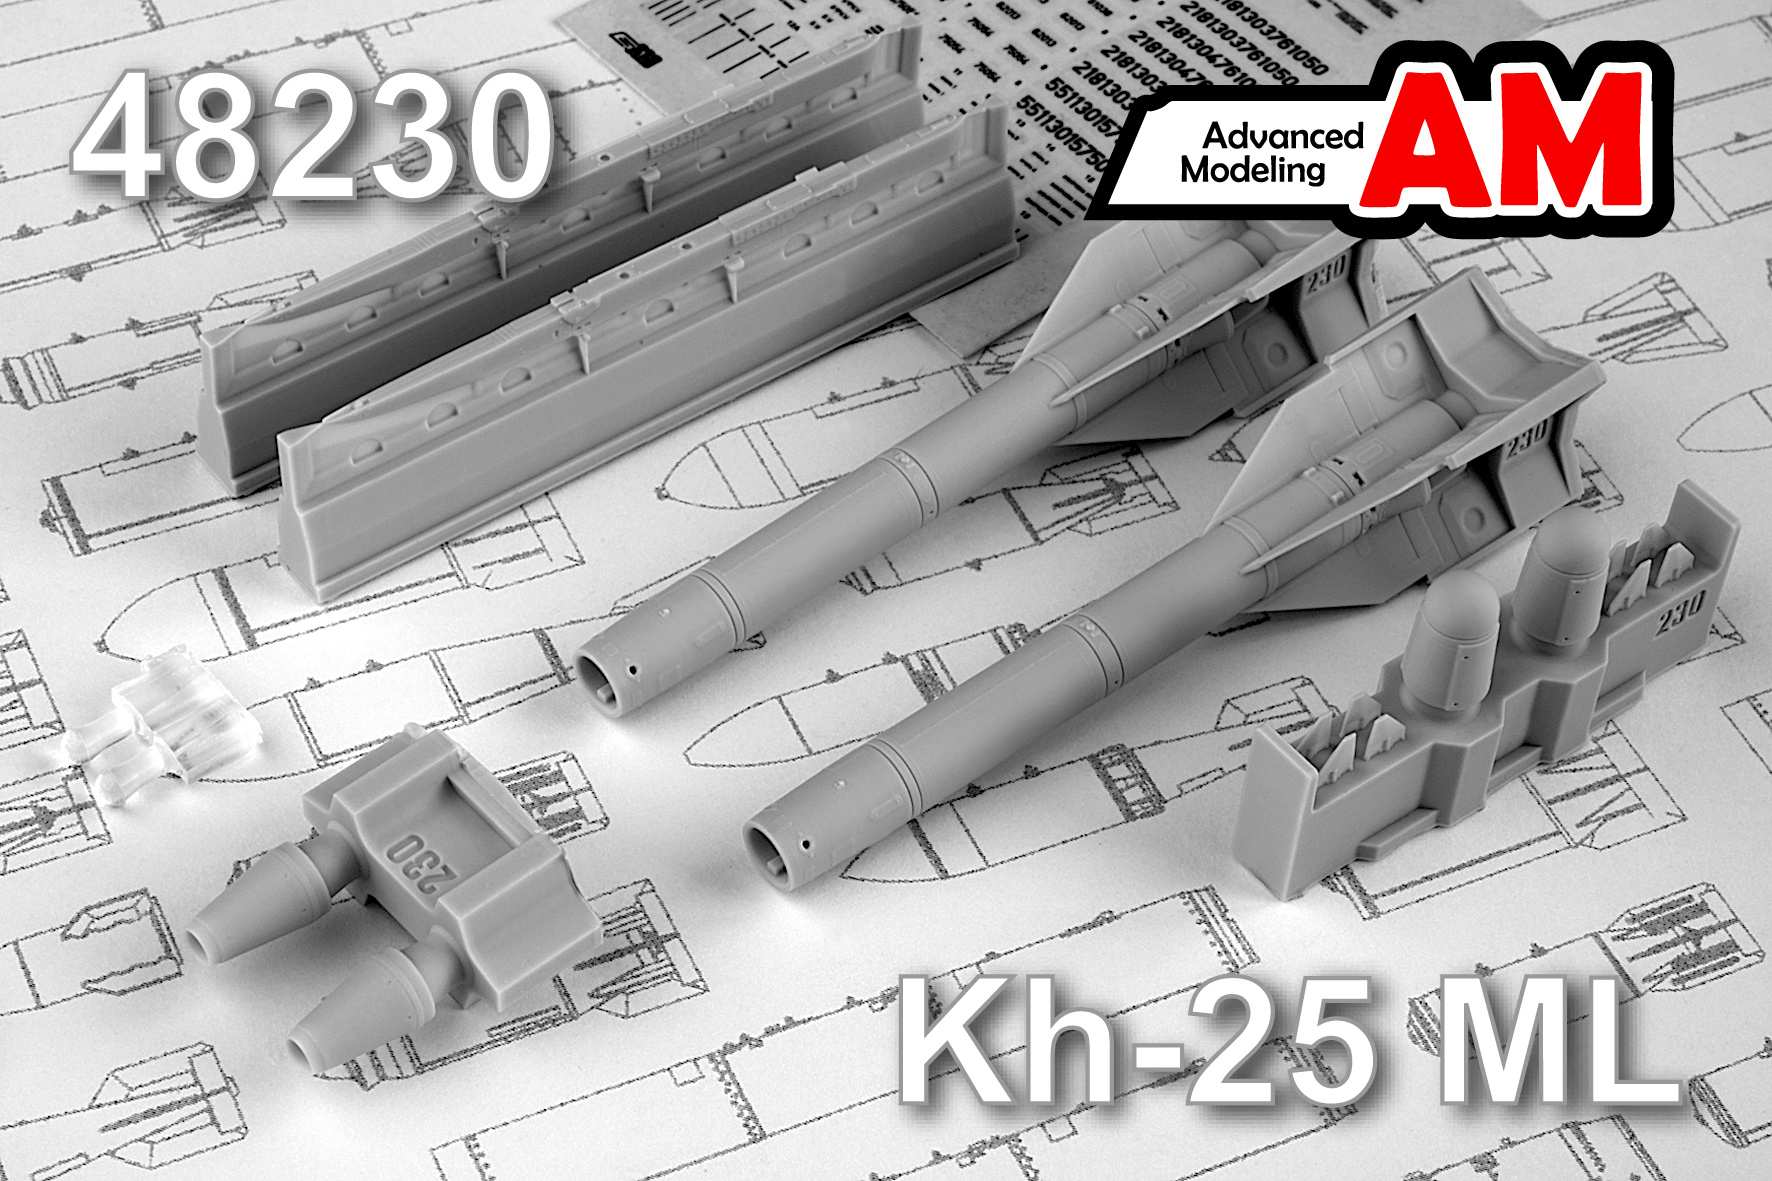 Additions (3D resin printing) 1/48 Aircraft guided missile Kh-25ML with launcher APU-68UM2 (Advanced Modeling) 